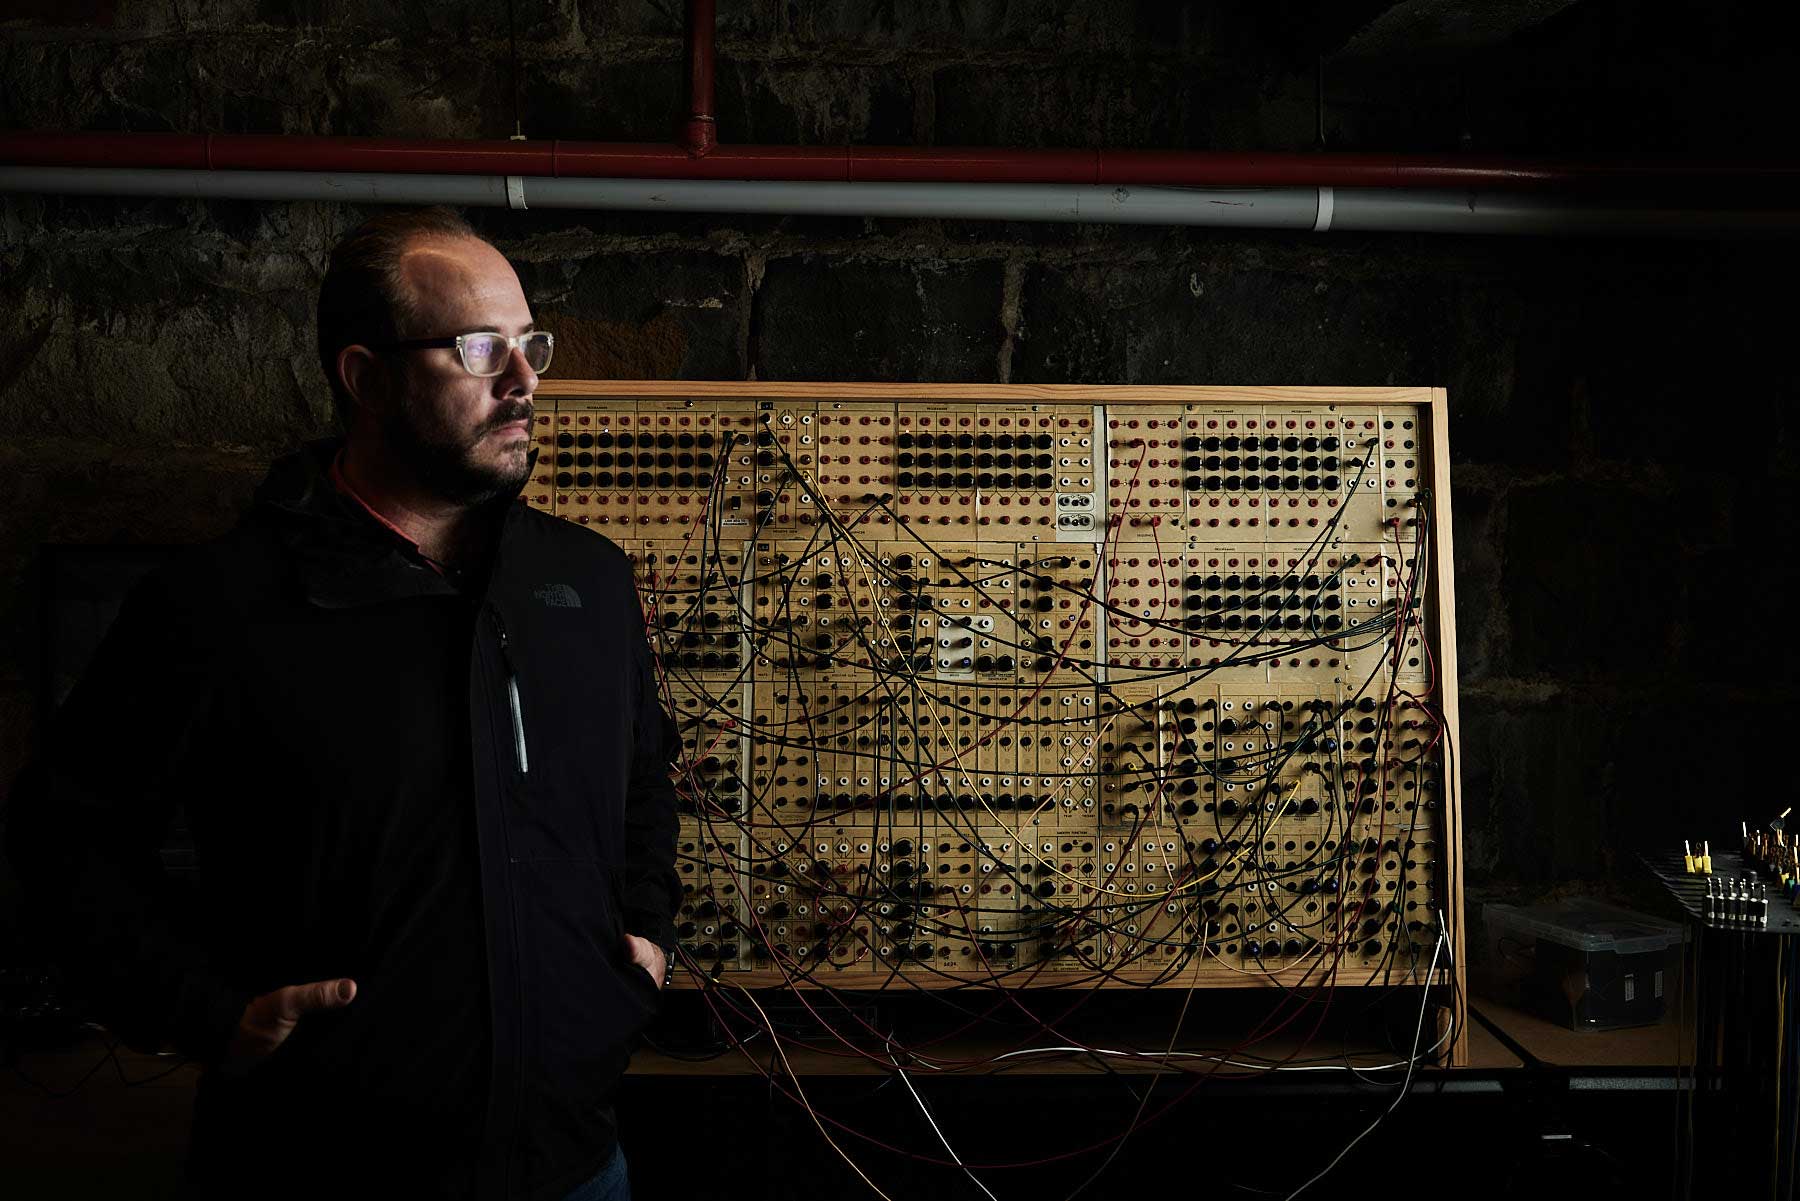 Ben Carey standing in front of the Serge 'Paperface' synthesiser.